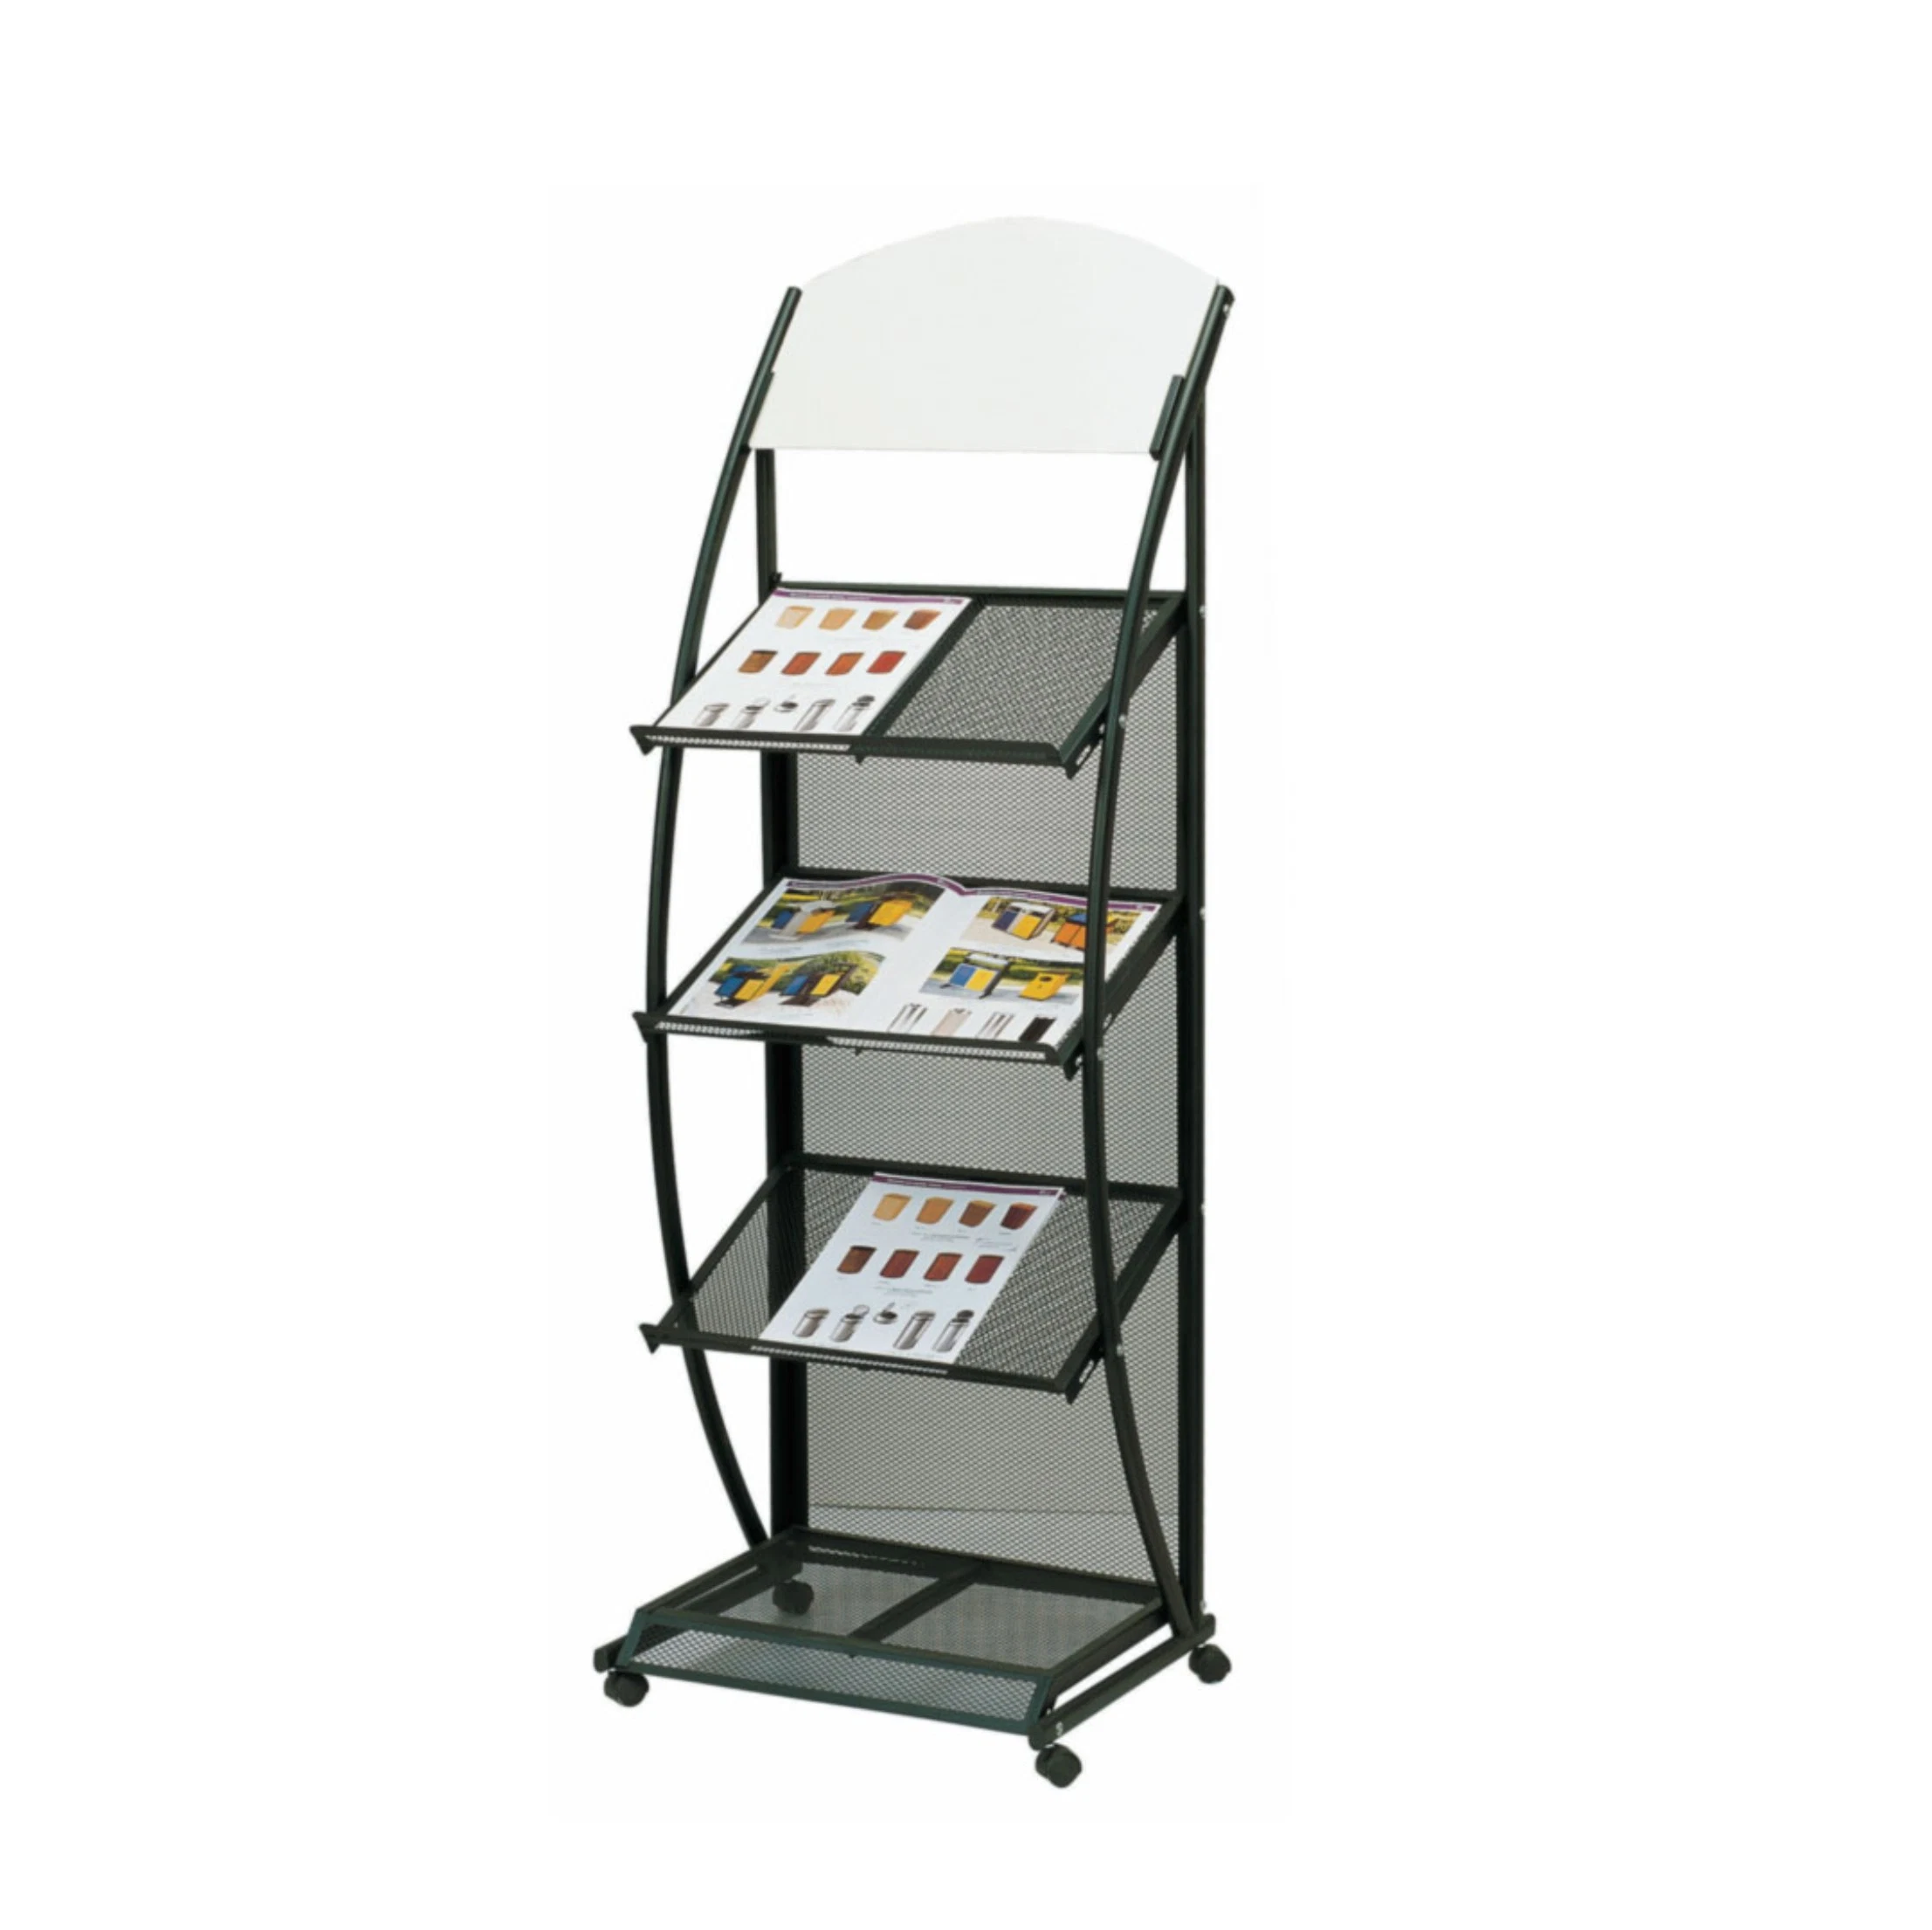 A4 Folding Information Display Magazine Vertical Display Stand Rack